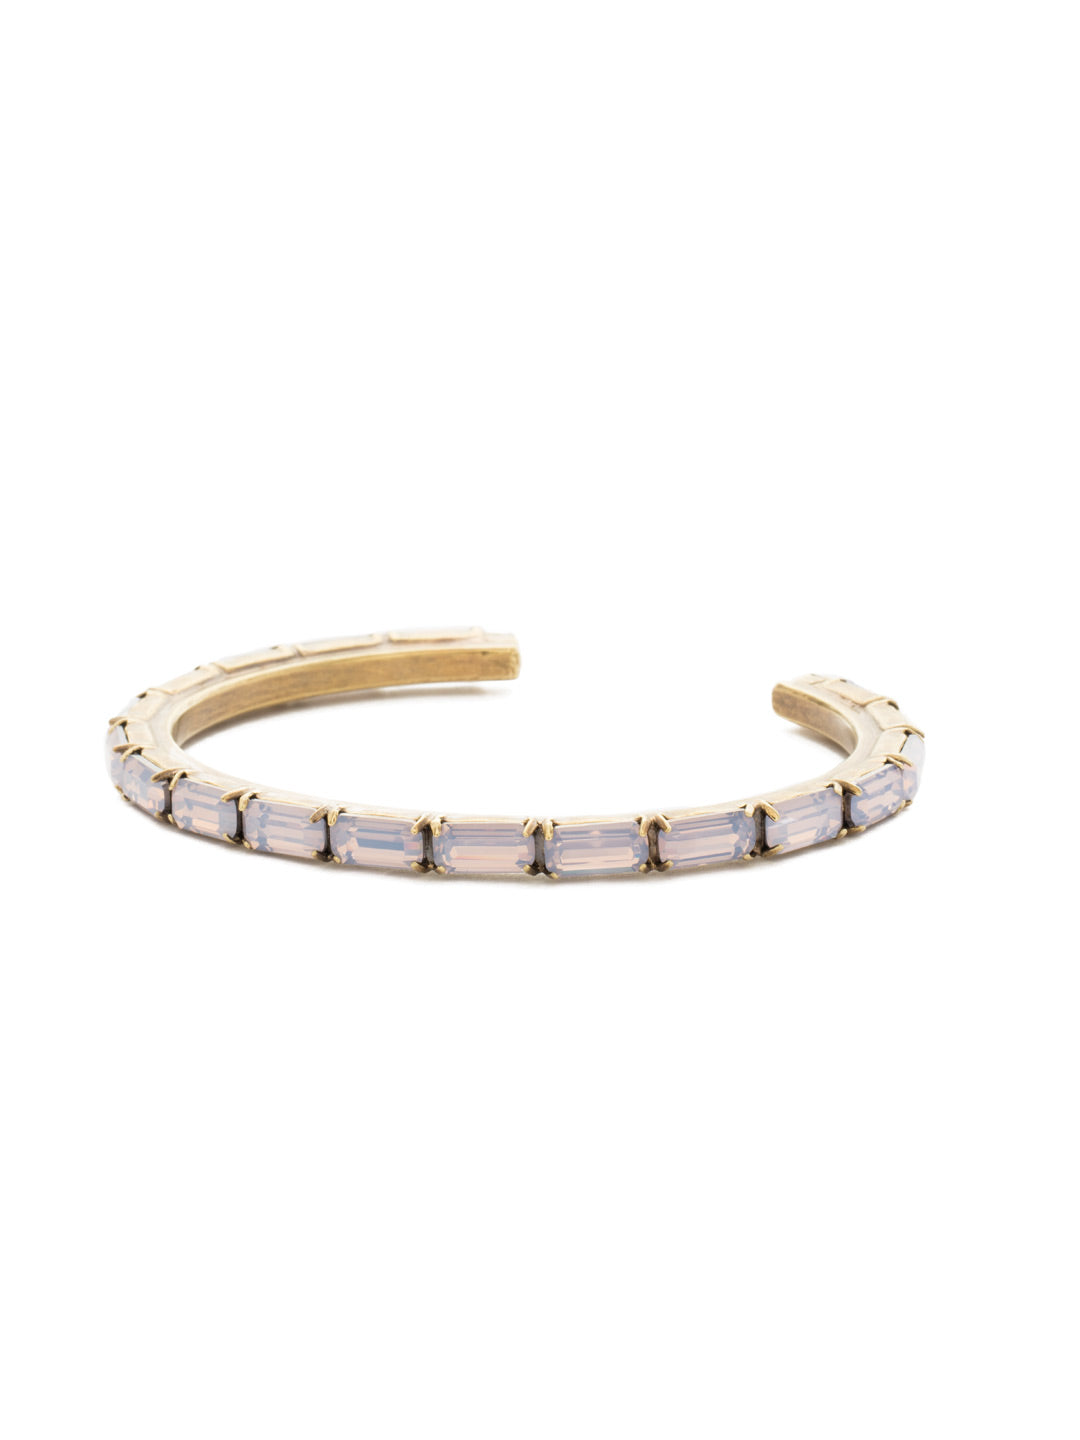 Brilliant Baguette Cuff Bracelet - BDK49AGROW - This cuff bracelet features repeating crystal baguettes and can be mixed and matched in a myriad of ways. From Sorrelli's Rose Water collection in our Antique Gold-tone finish.